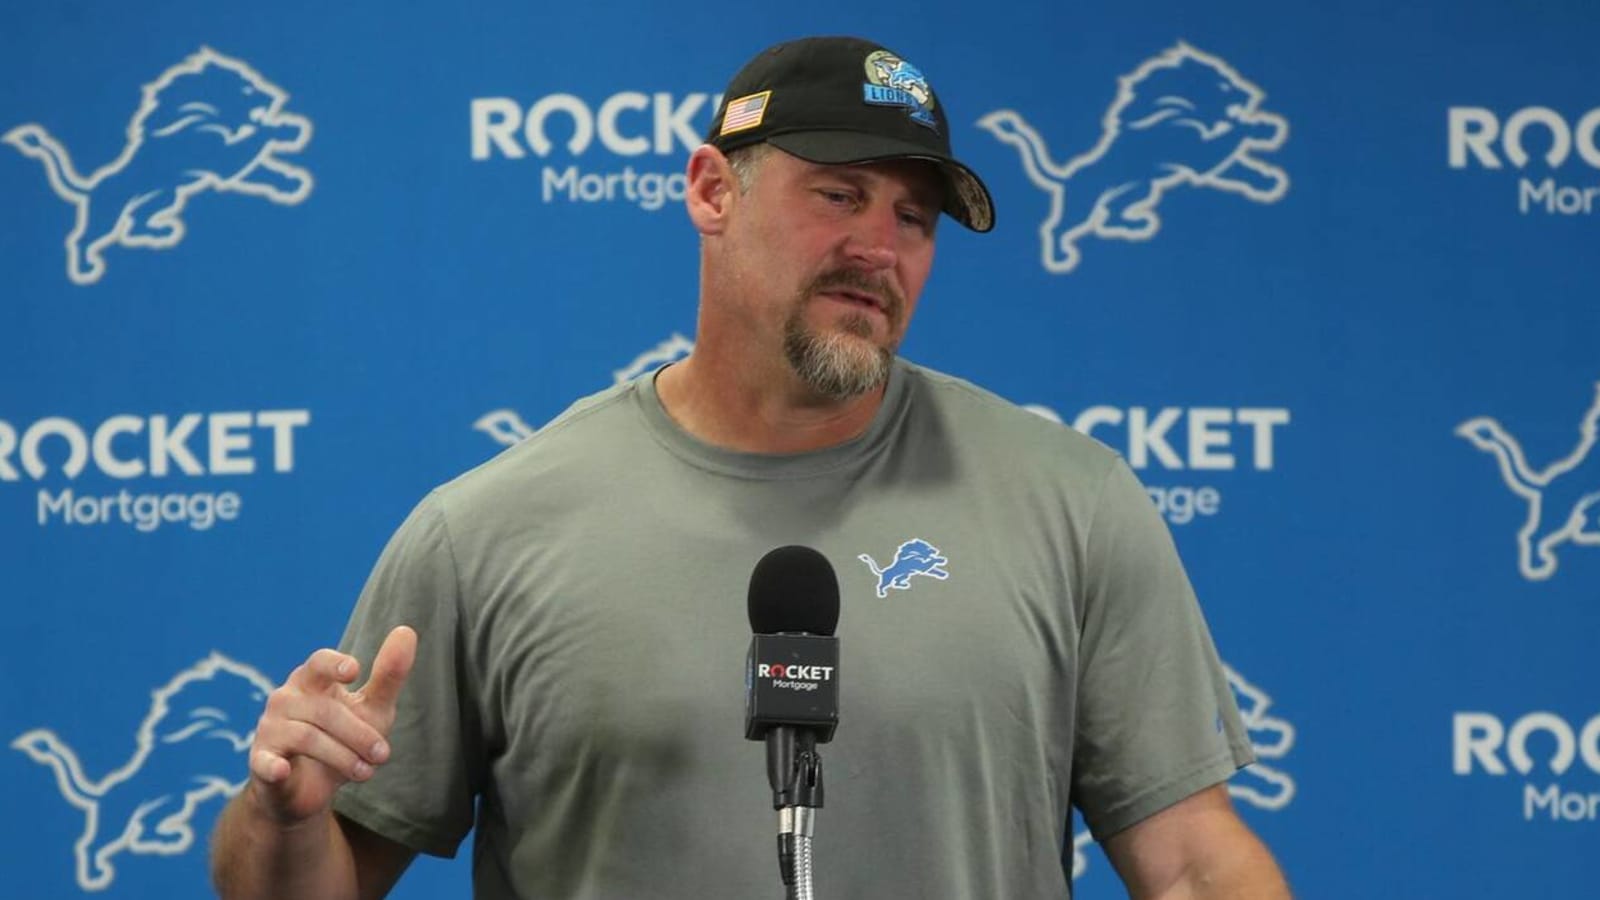 ESPN writer pumping the brakes on Lions' NFC North title hopes